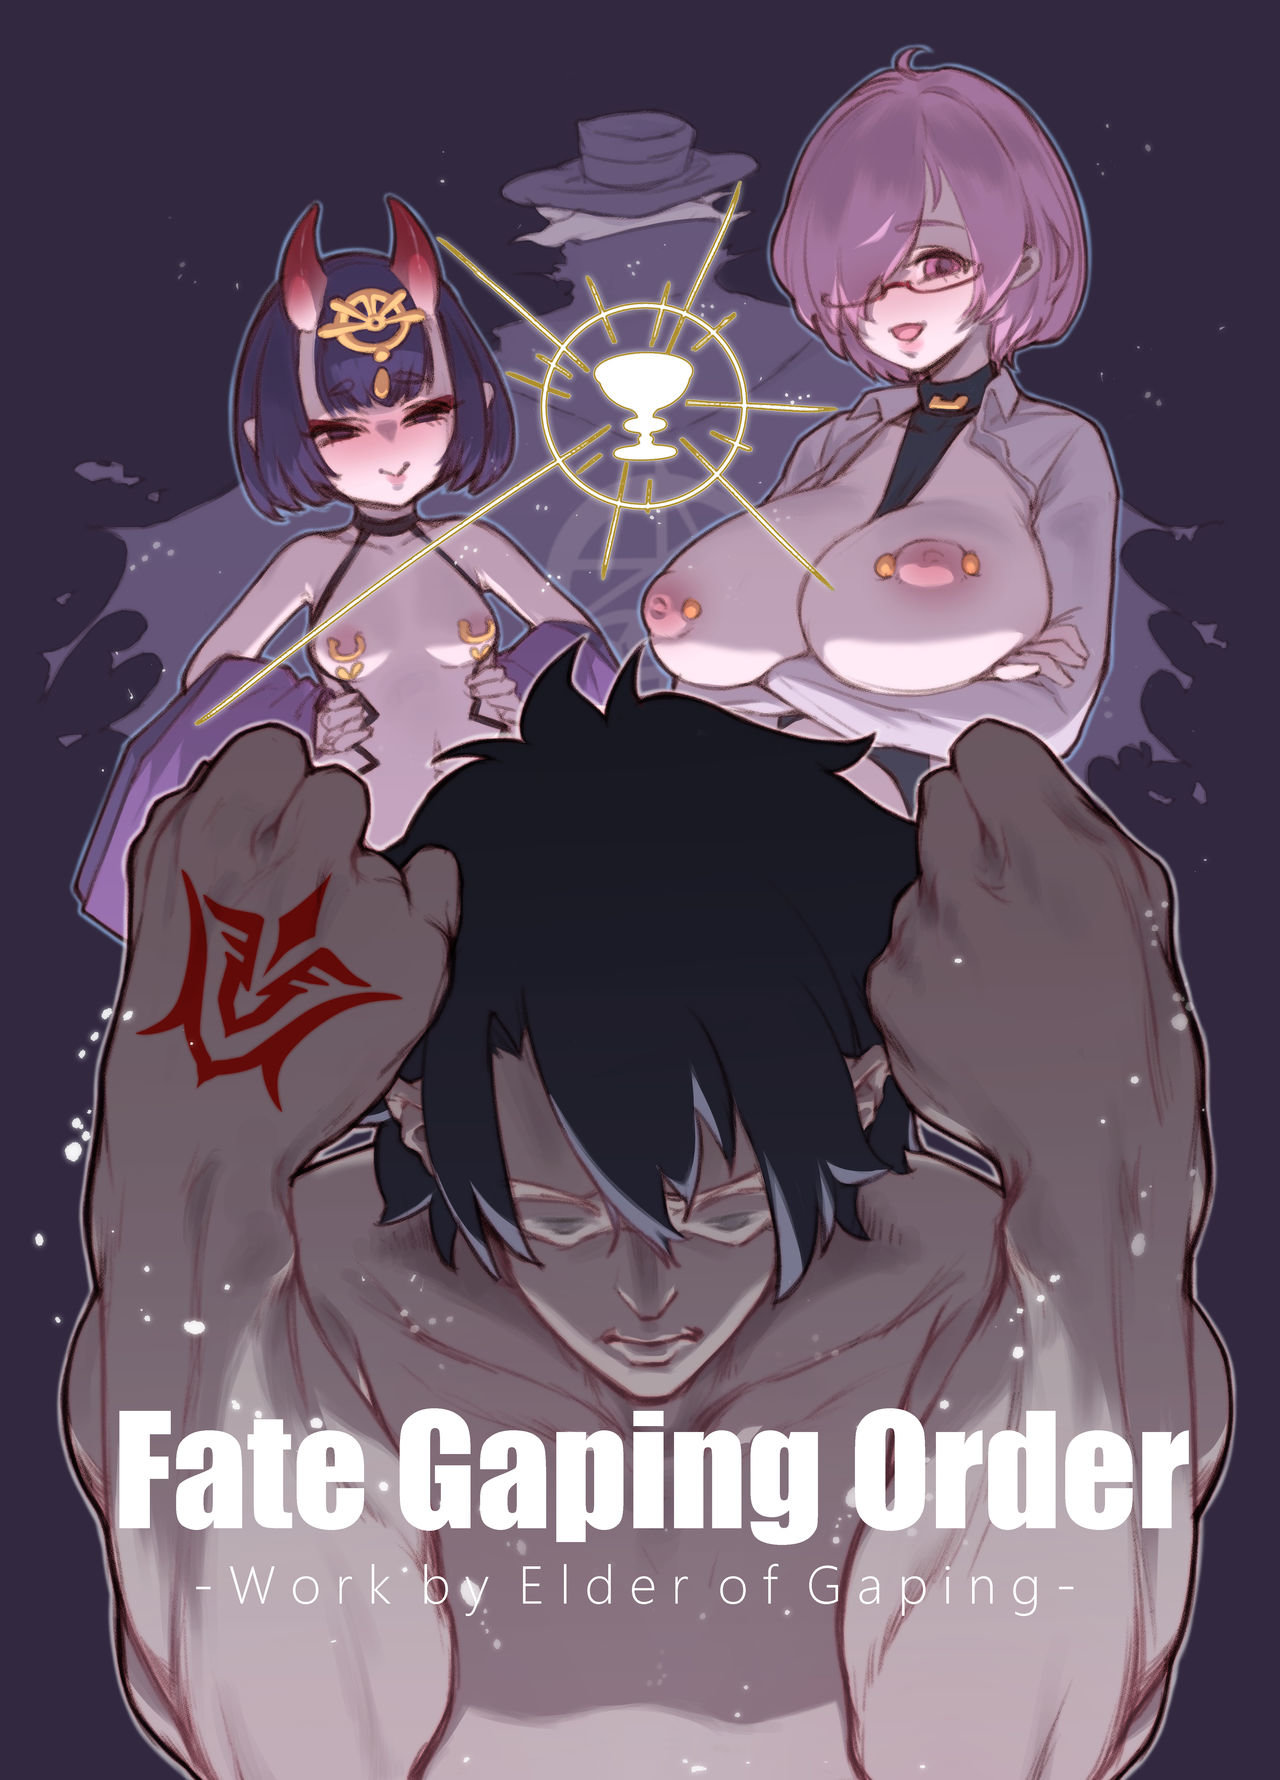 Fate Gaping Order - 0